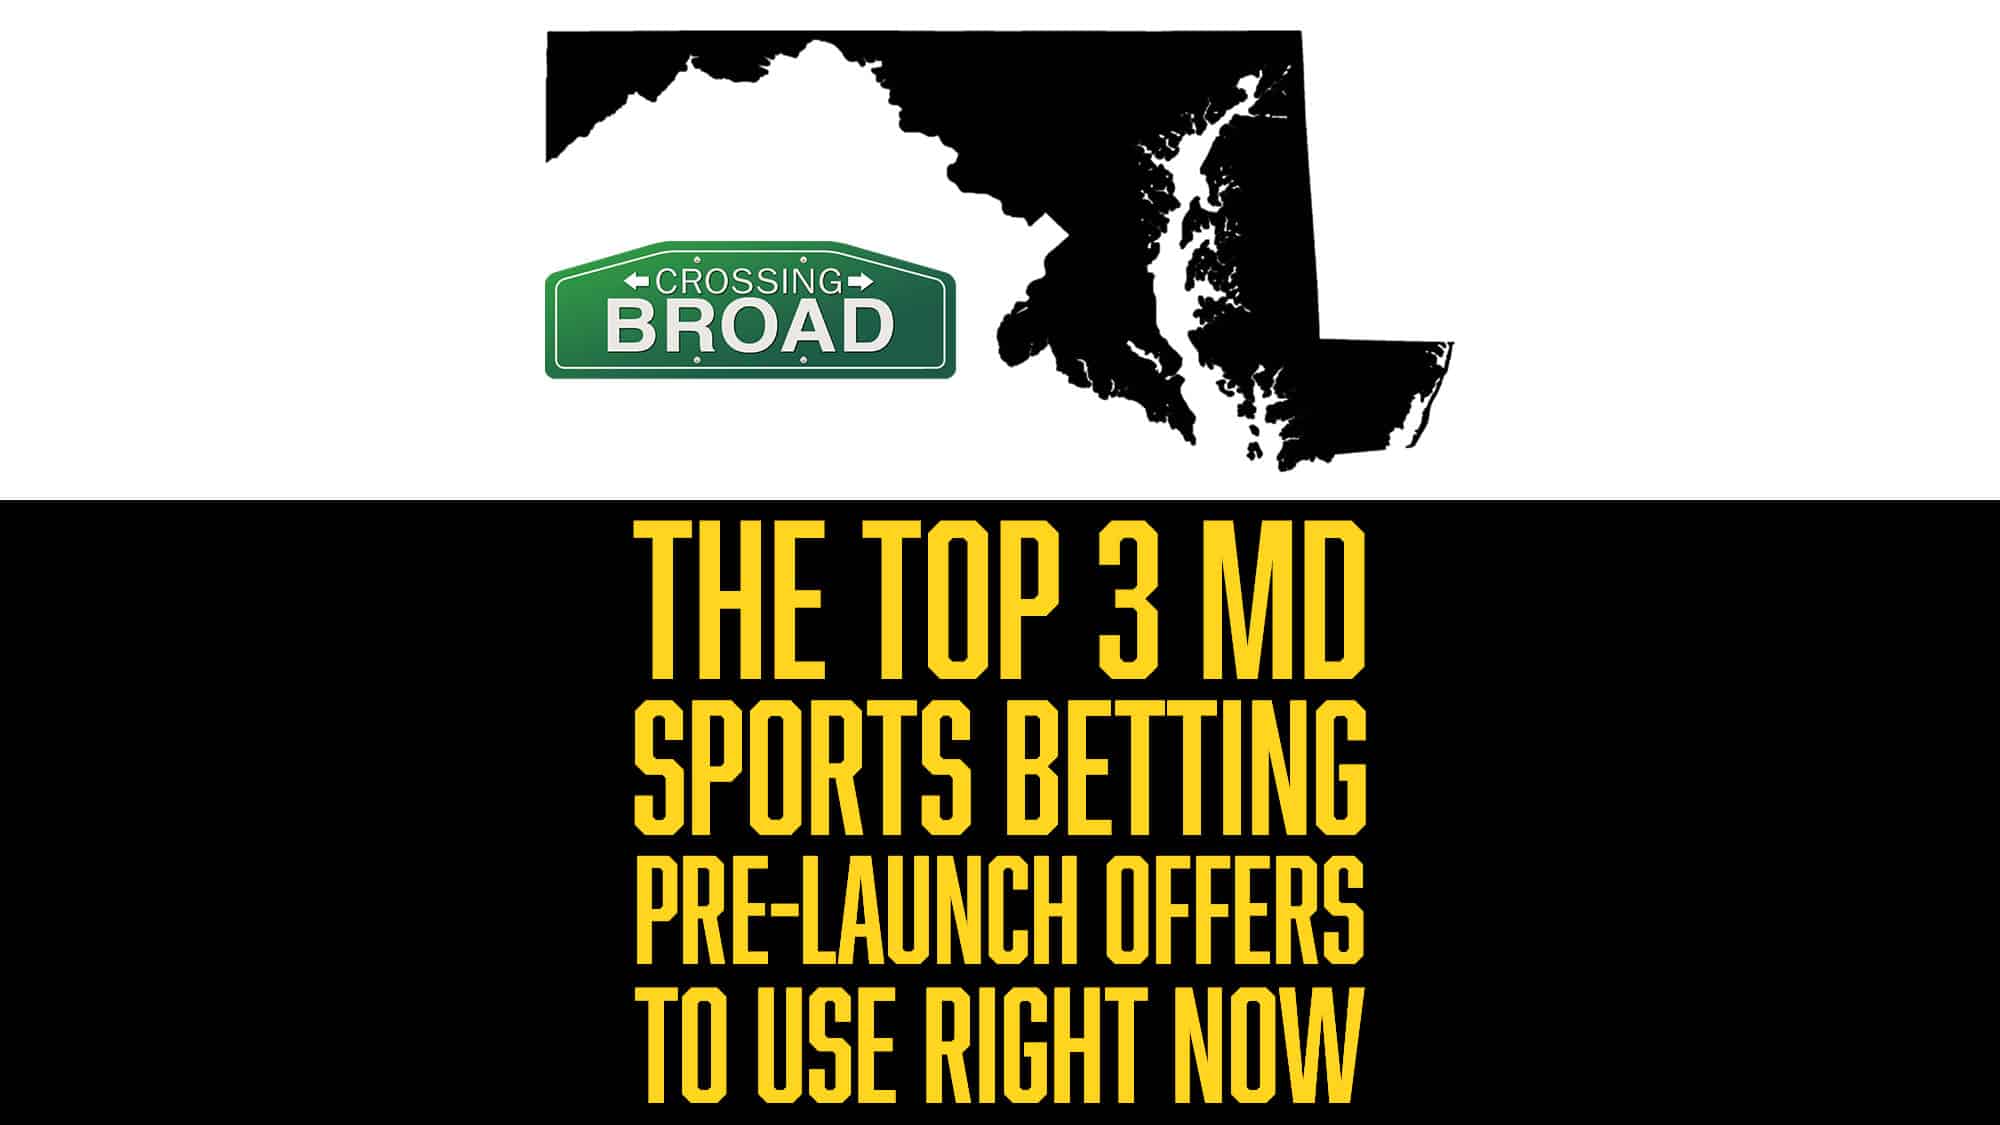 Top 3 Maryland sports betting pre-launch offers to utilize now